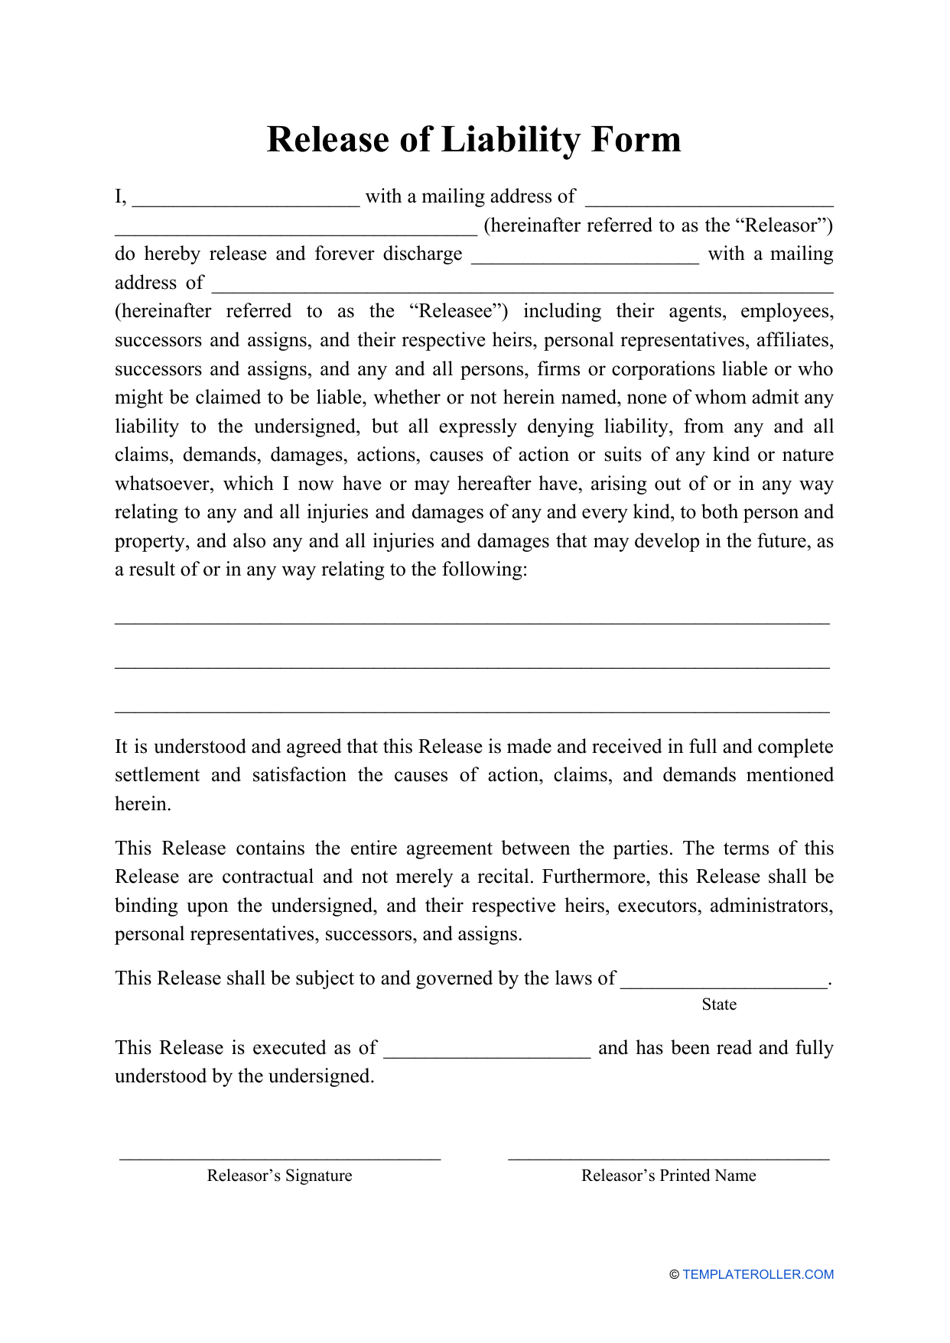 Free Liability Release Forms Printable Online Printable Templates